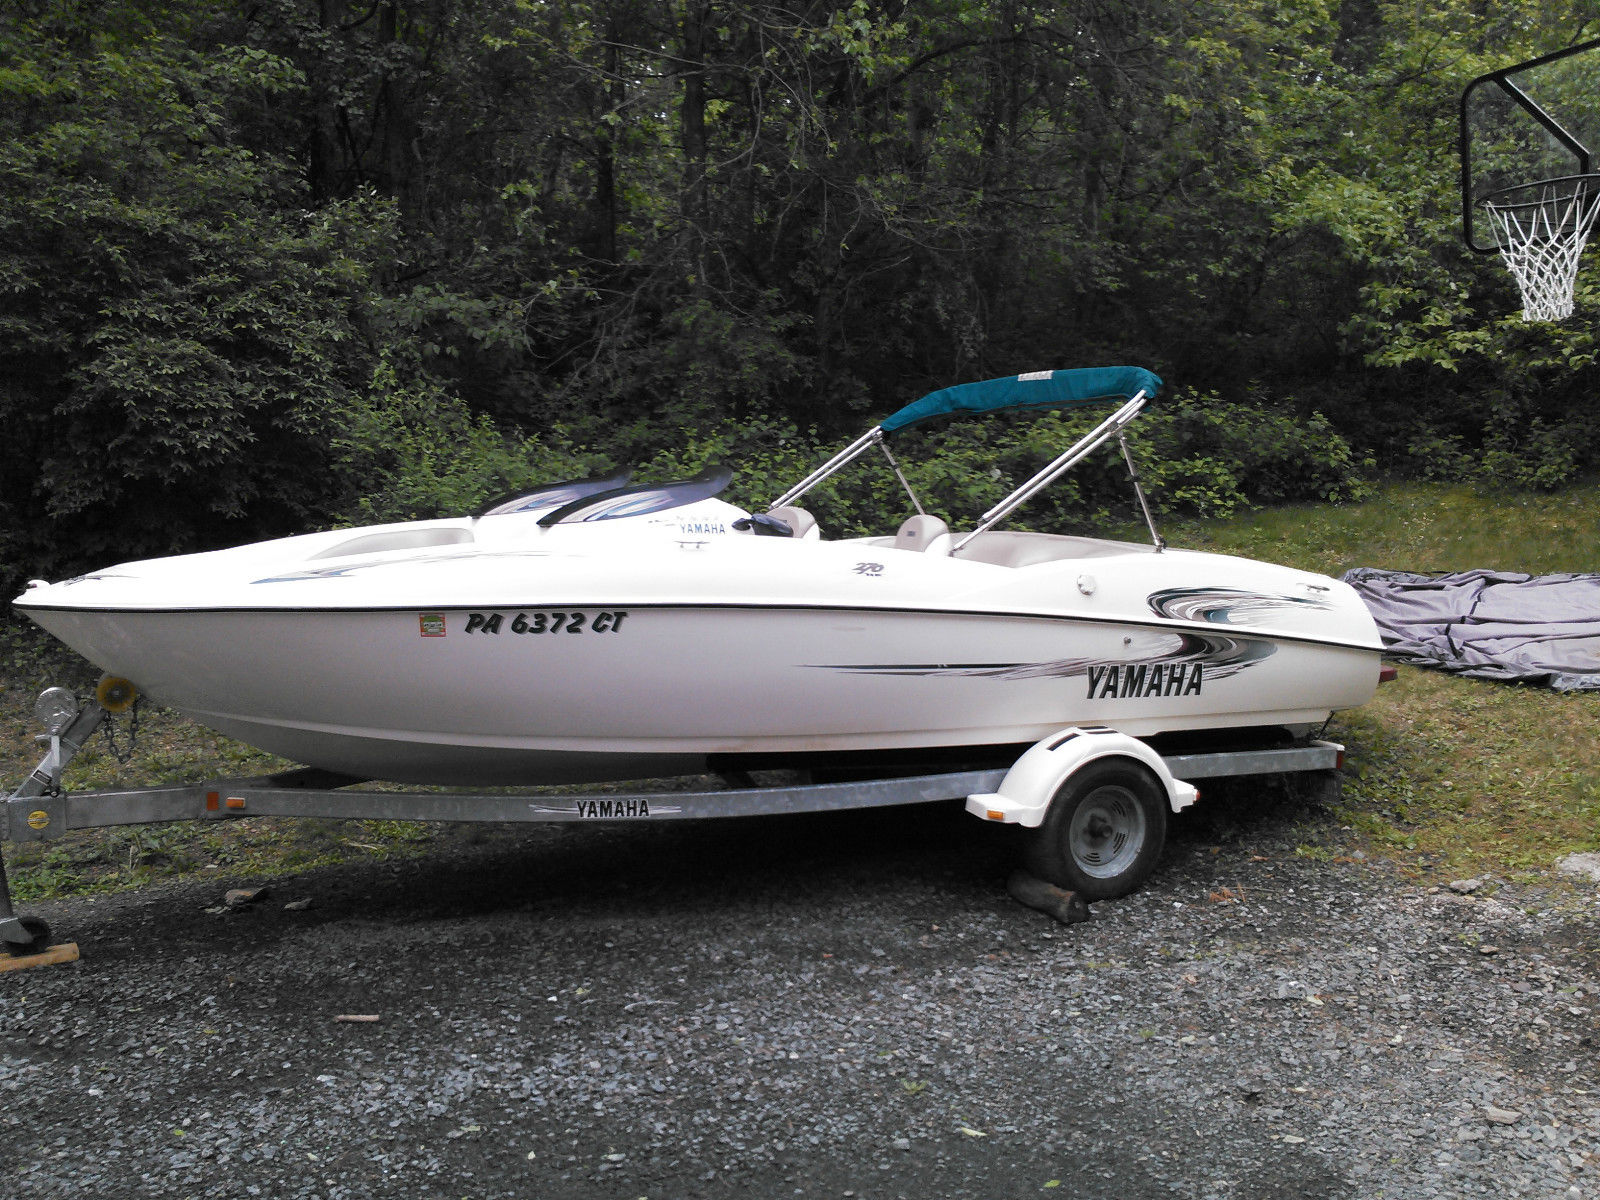 LS2000 Yamaha Jet Boat 2000 for sale for $7,750 - Boats ...